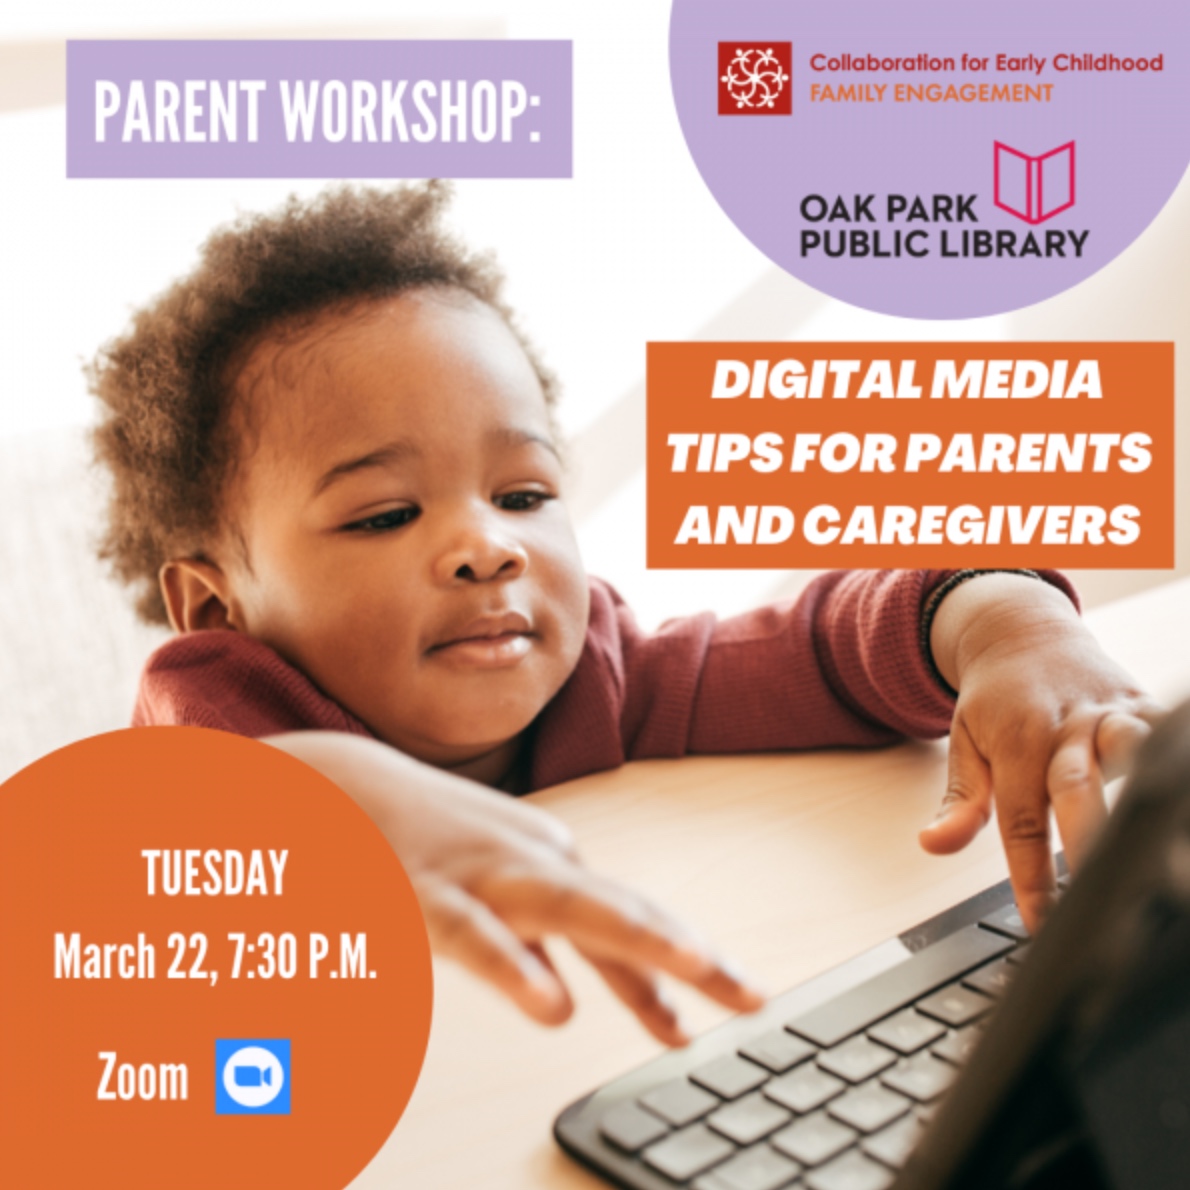 The Collaboration is partnering up with @oakparklibrary to host a digital media tips workshop for parents and caregivers!

It will be hosted by Eileen Saam and Jenny Jackson from Oak Park Public Library. RSVP today! https://t.co/1pDe3bpdgr https://t.co/6NQXlXPKrd